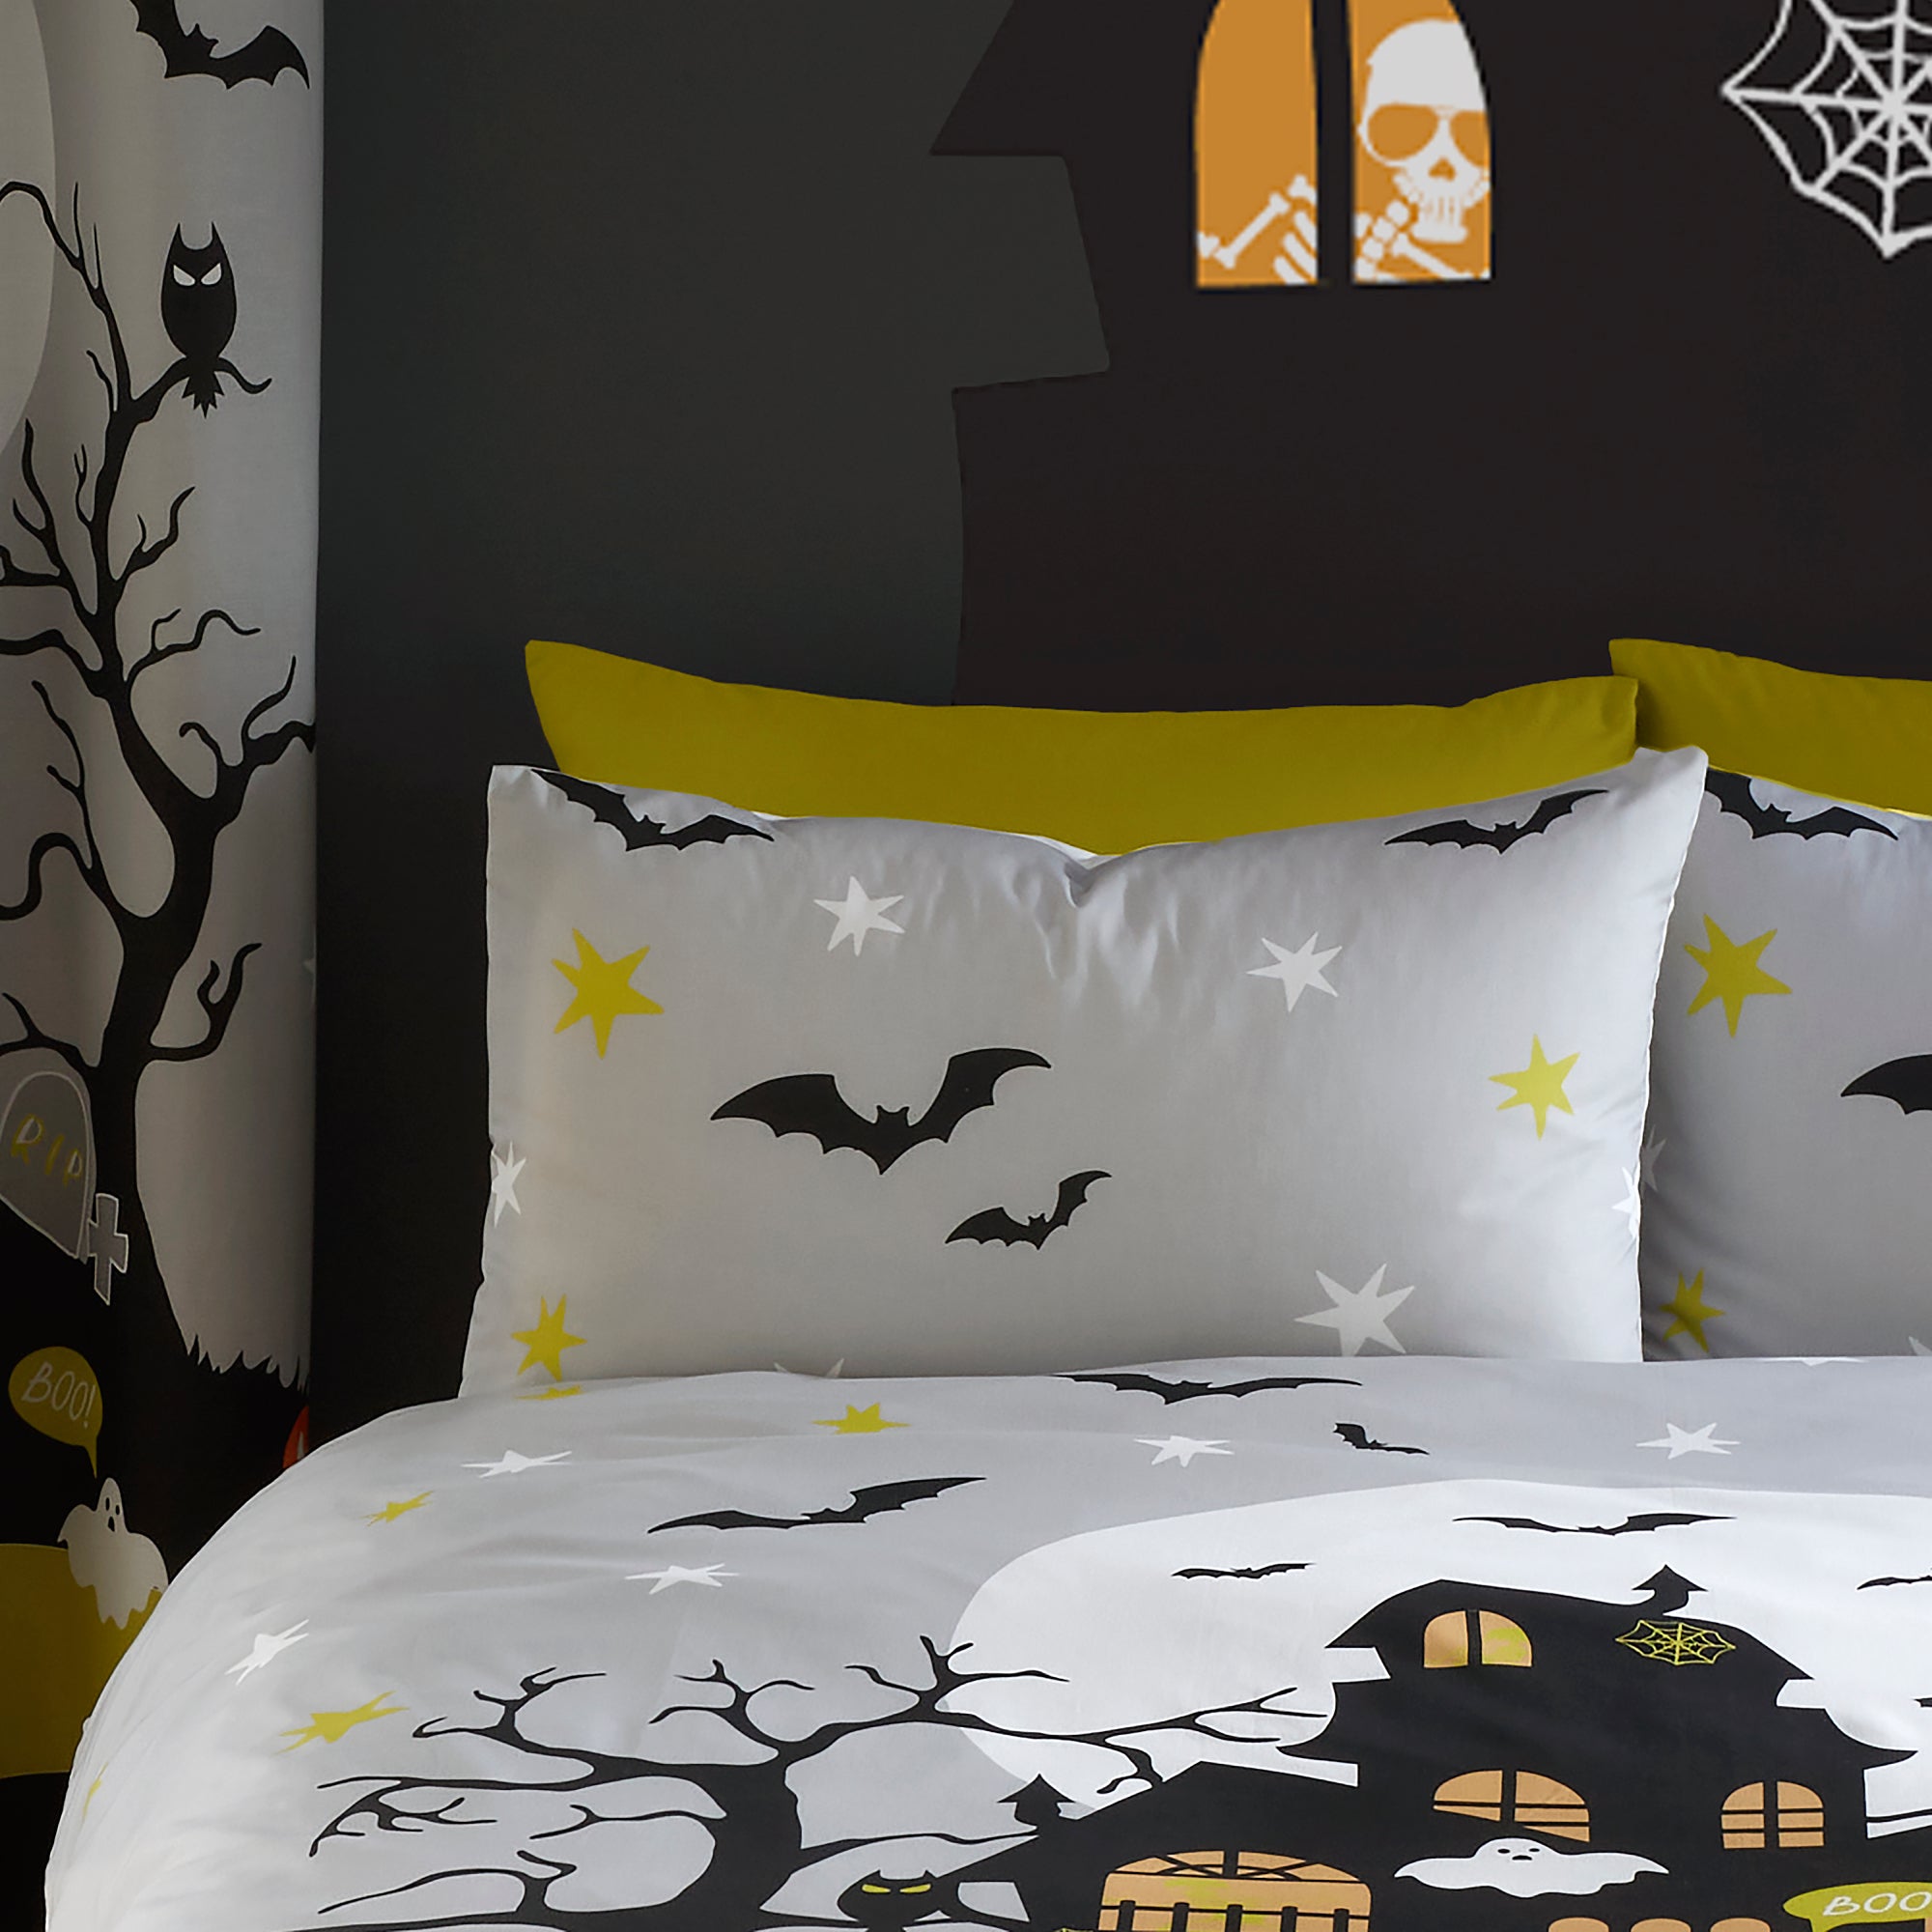 Duvet Cover Set Halloween Haunted House by Bedlam in Grey